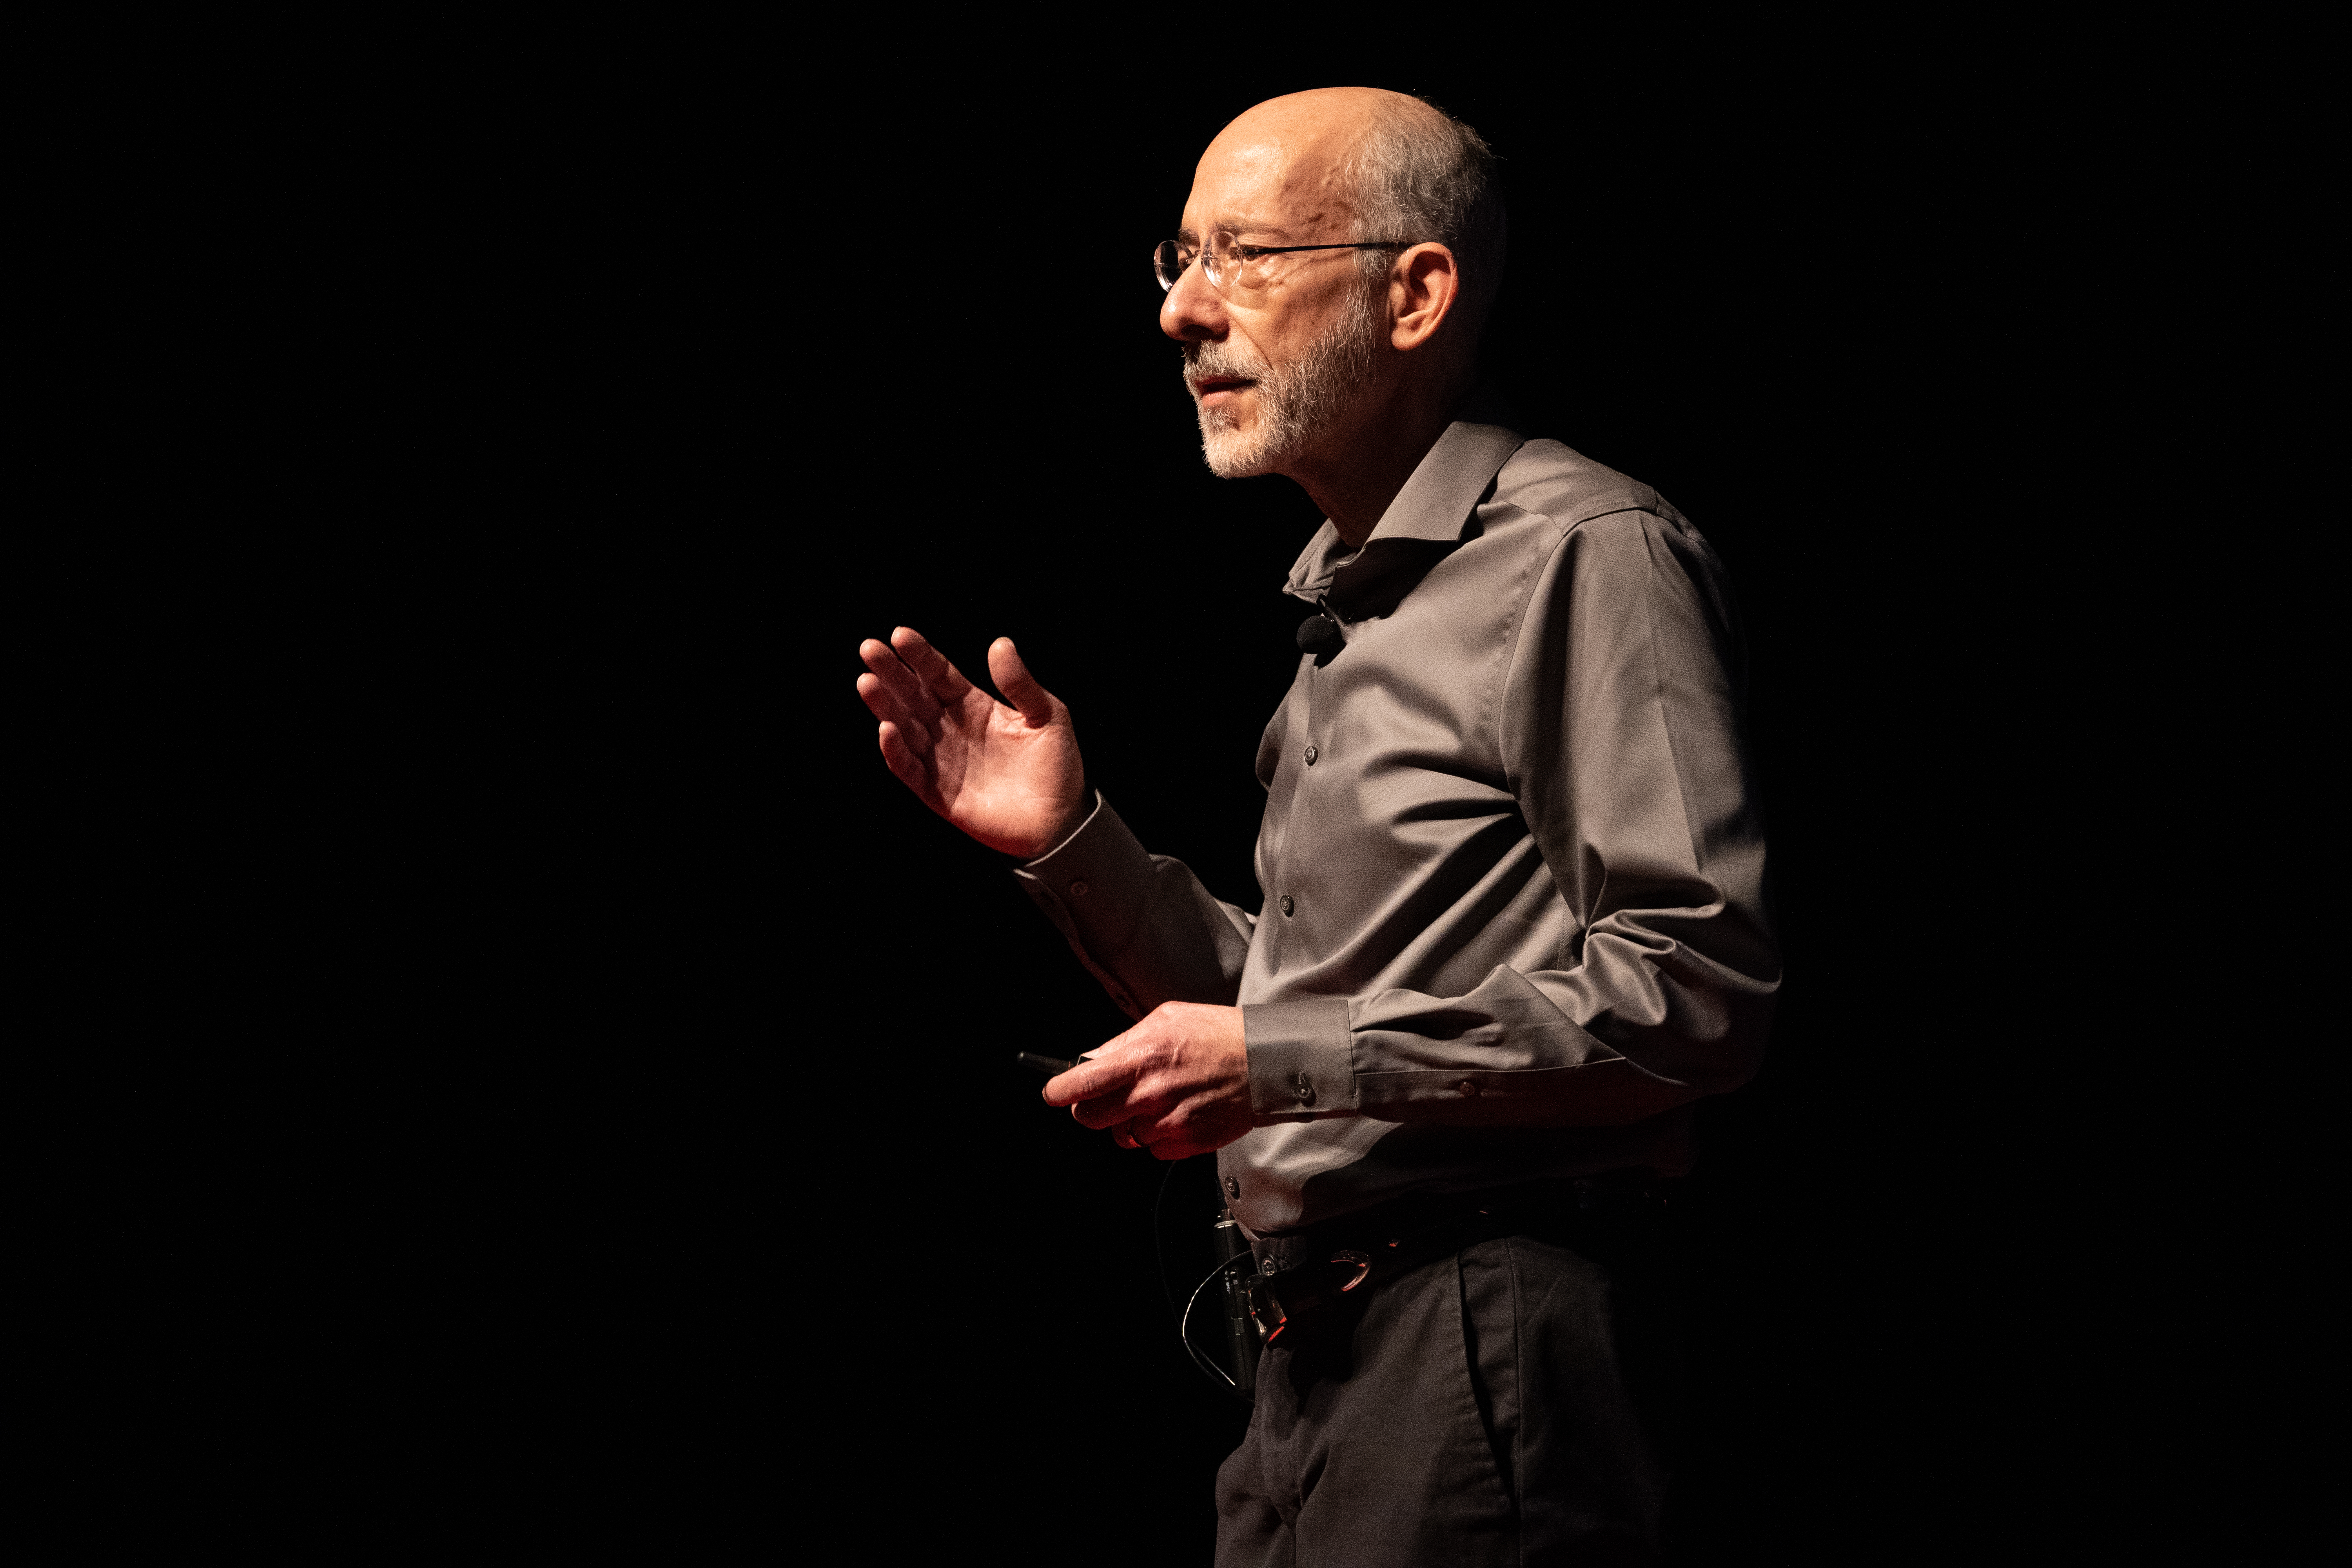 Steven Rosenzweig, Ph.D., practices his presentation for the upcoming TEDxCharleston talk. Photo by Clif Rhodes